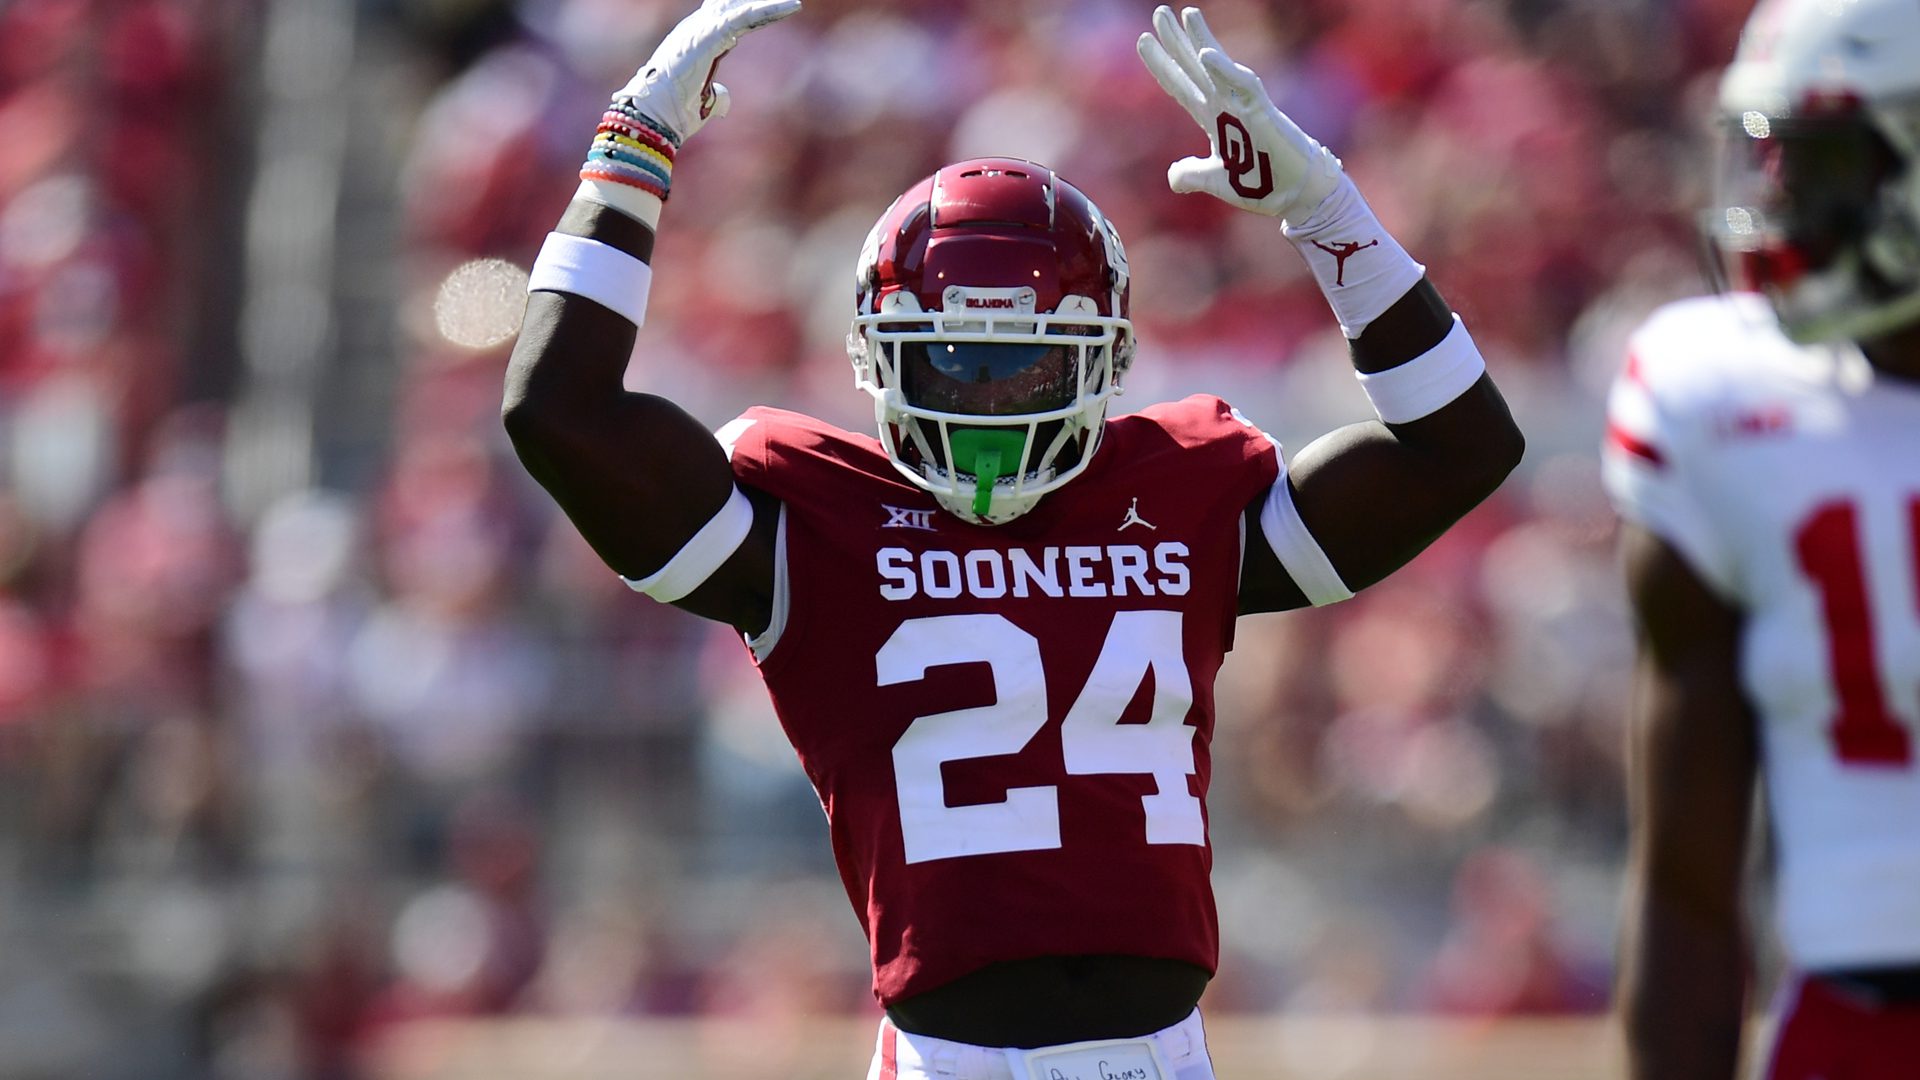 Oklahoma Sooner LB Brian Asamoah may end up being the steal in the 2022 NFL Draft. Let's break it down!